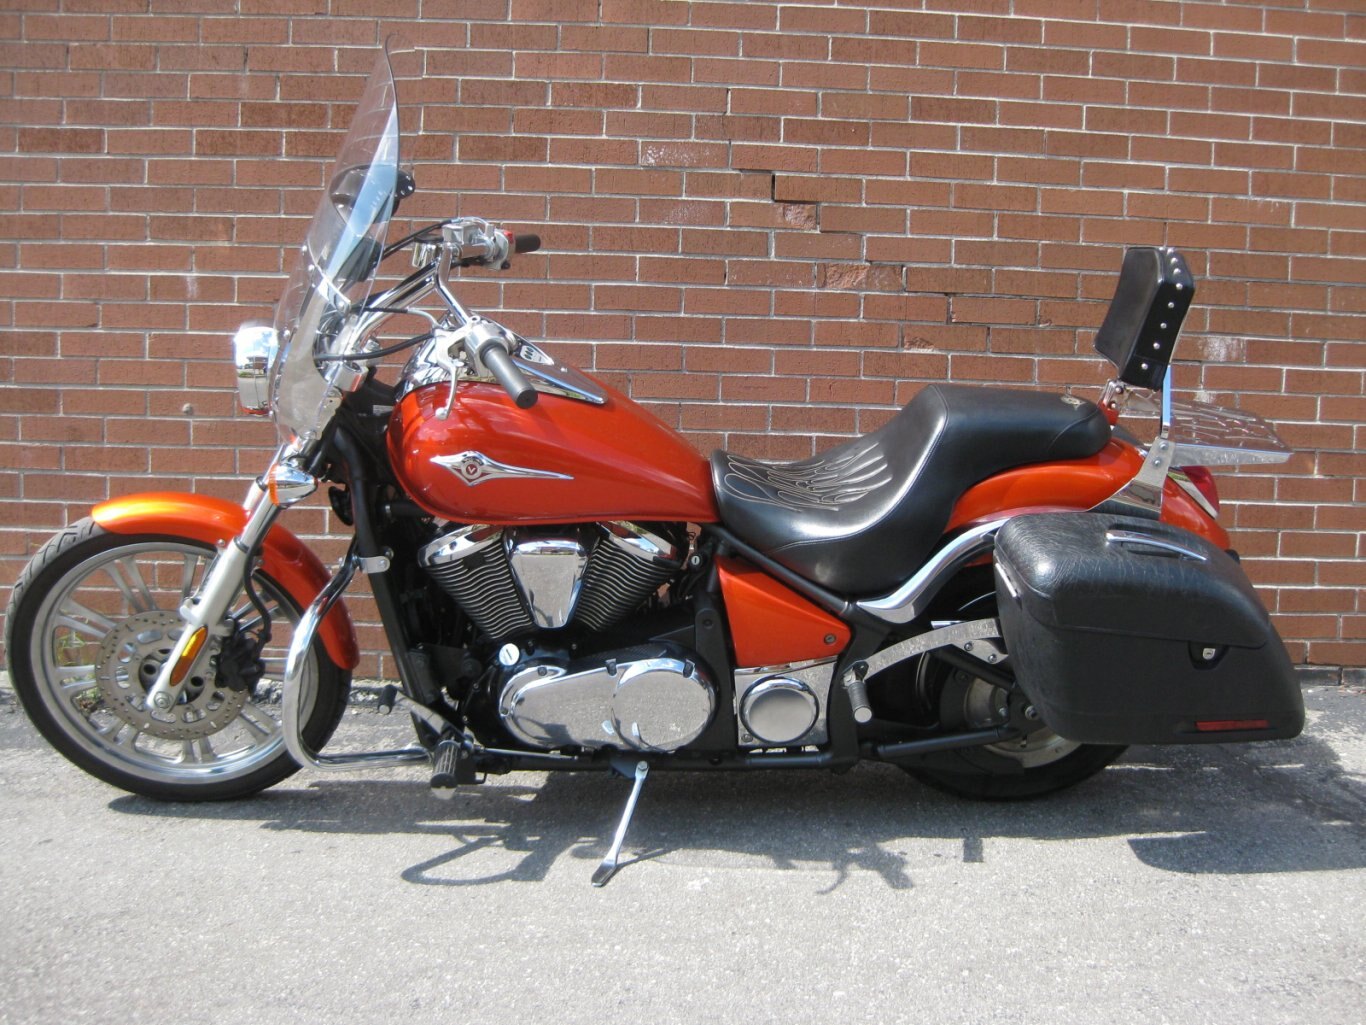 2009 Kawasaki Vulcan 900 Custom SOLD CONGRATULATIONS MARK, WELCOME TO THE WORLD OF TWO WHEELED EXCITEMENT!!